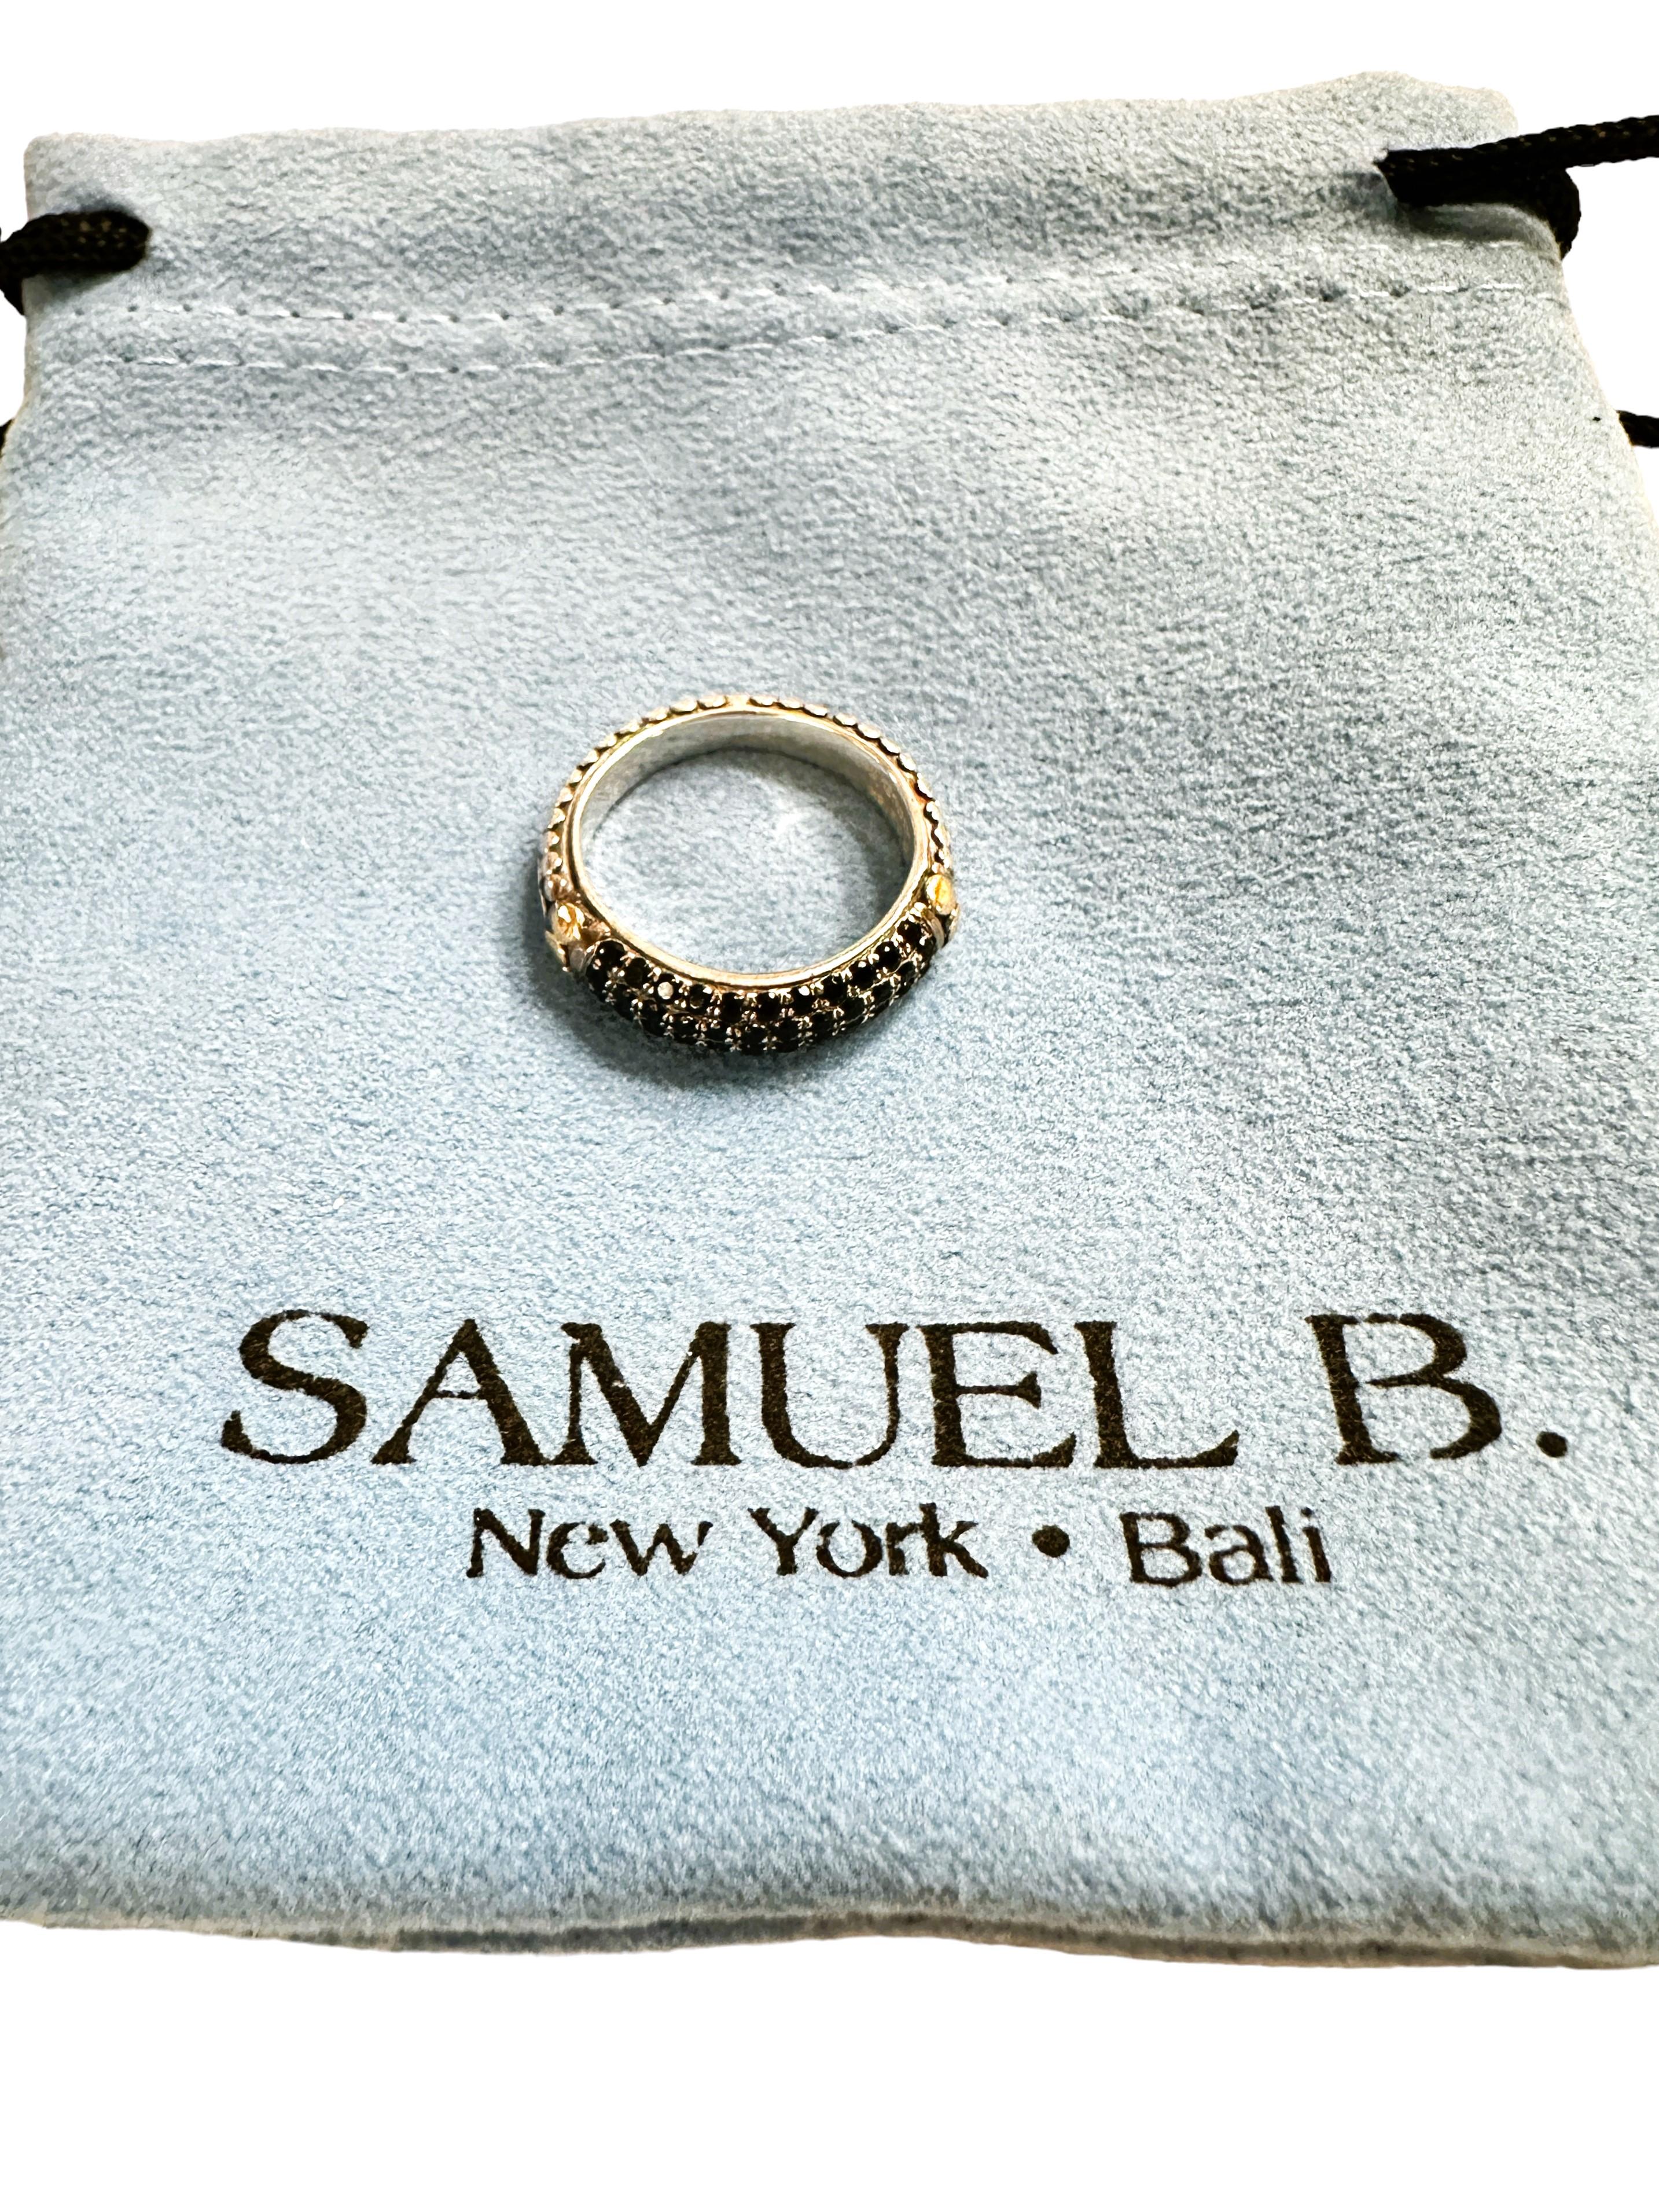 Samuel B 18k and Sterling Silver Black Onyx Ring Size 7 For Sale 3